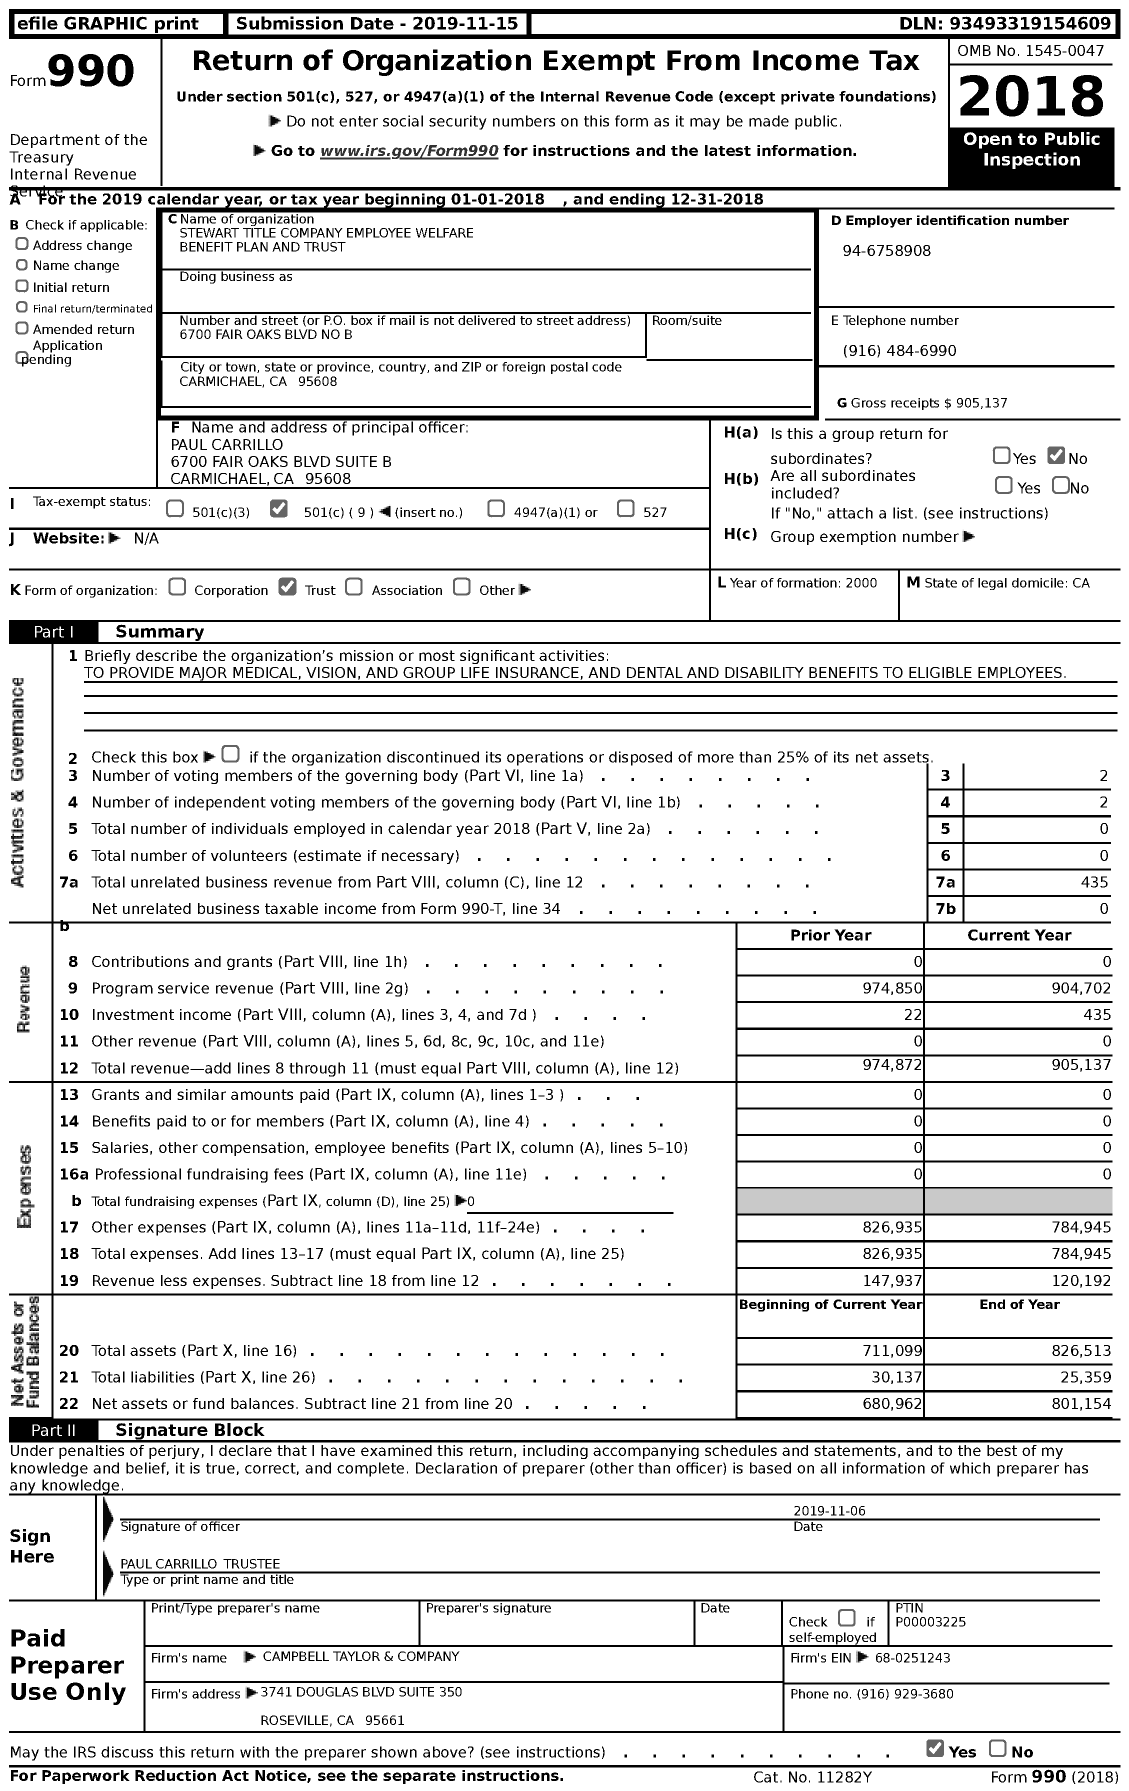 Image of first page of 2018 Form 990 for Stewart Title Company Employee Welfare Benefit Plan and Trust